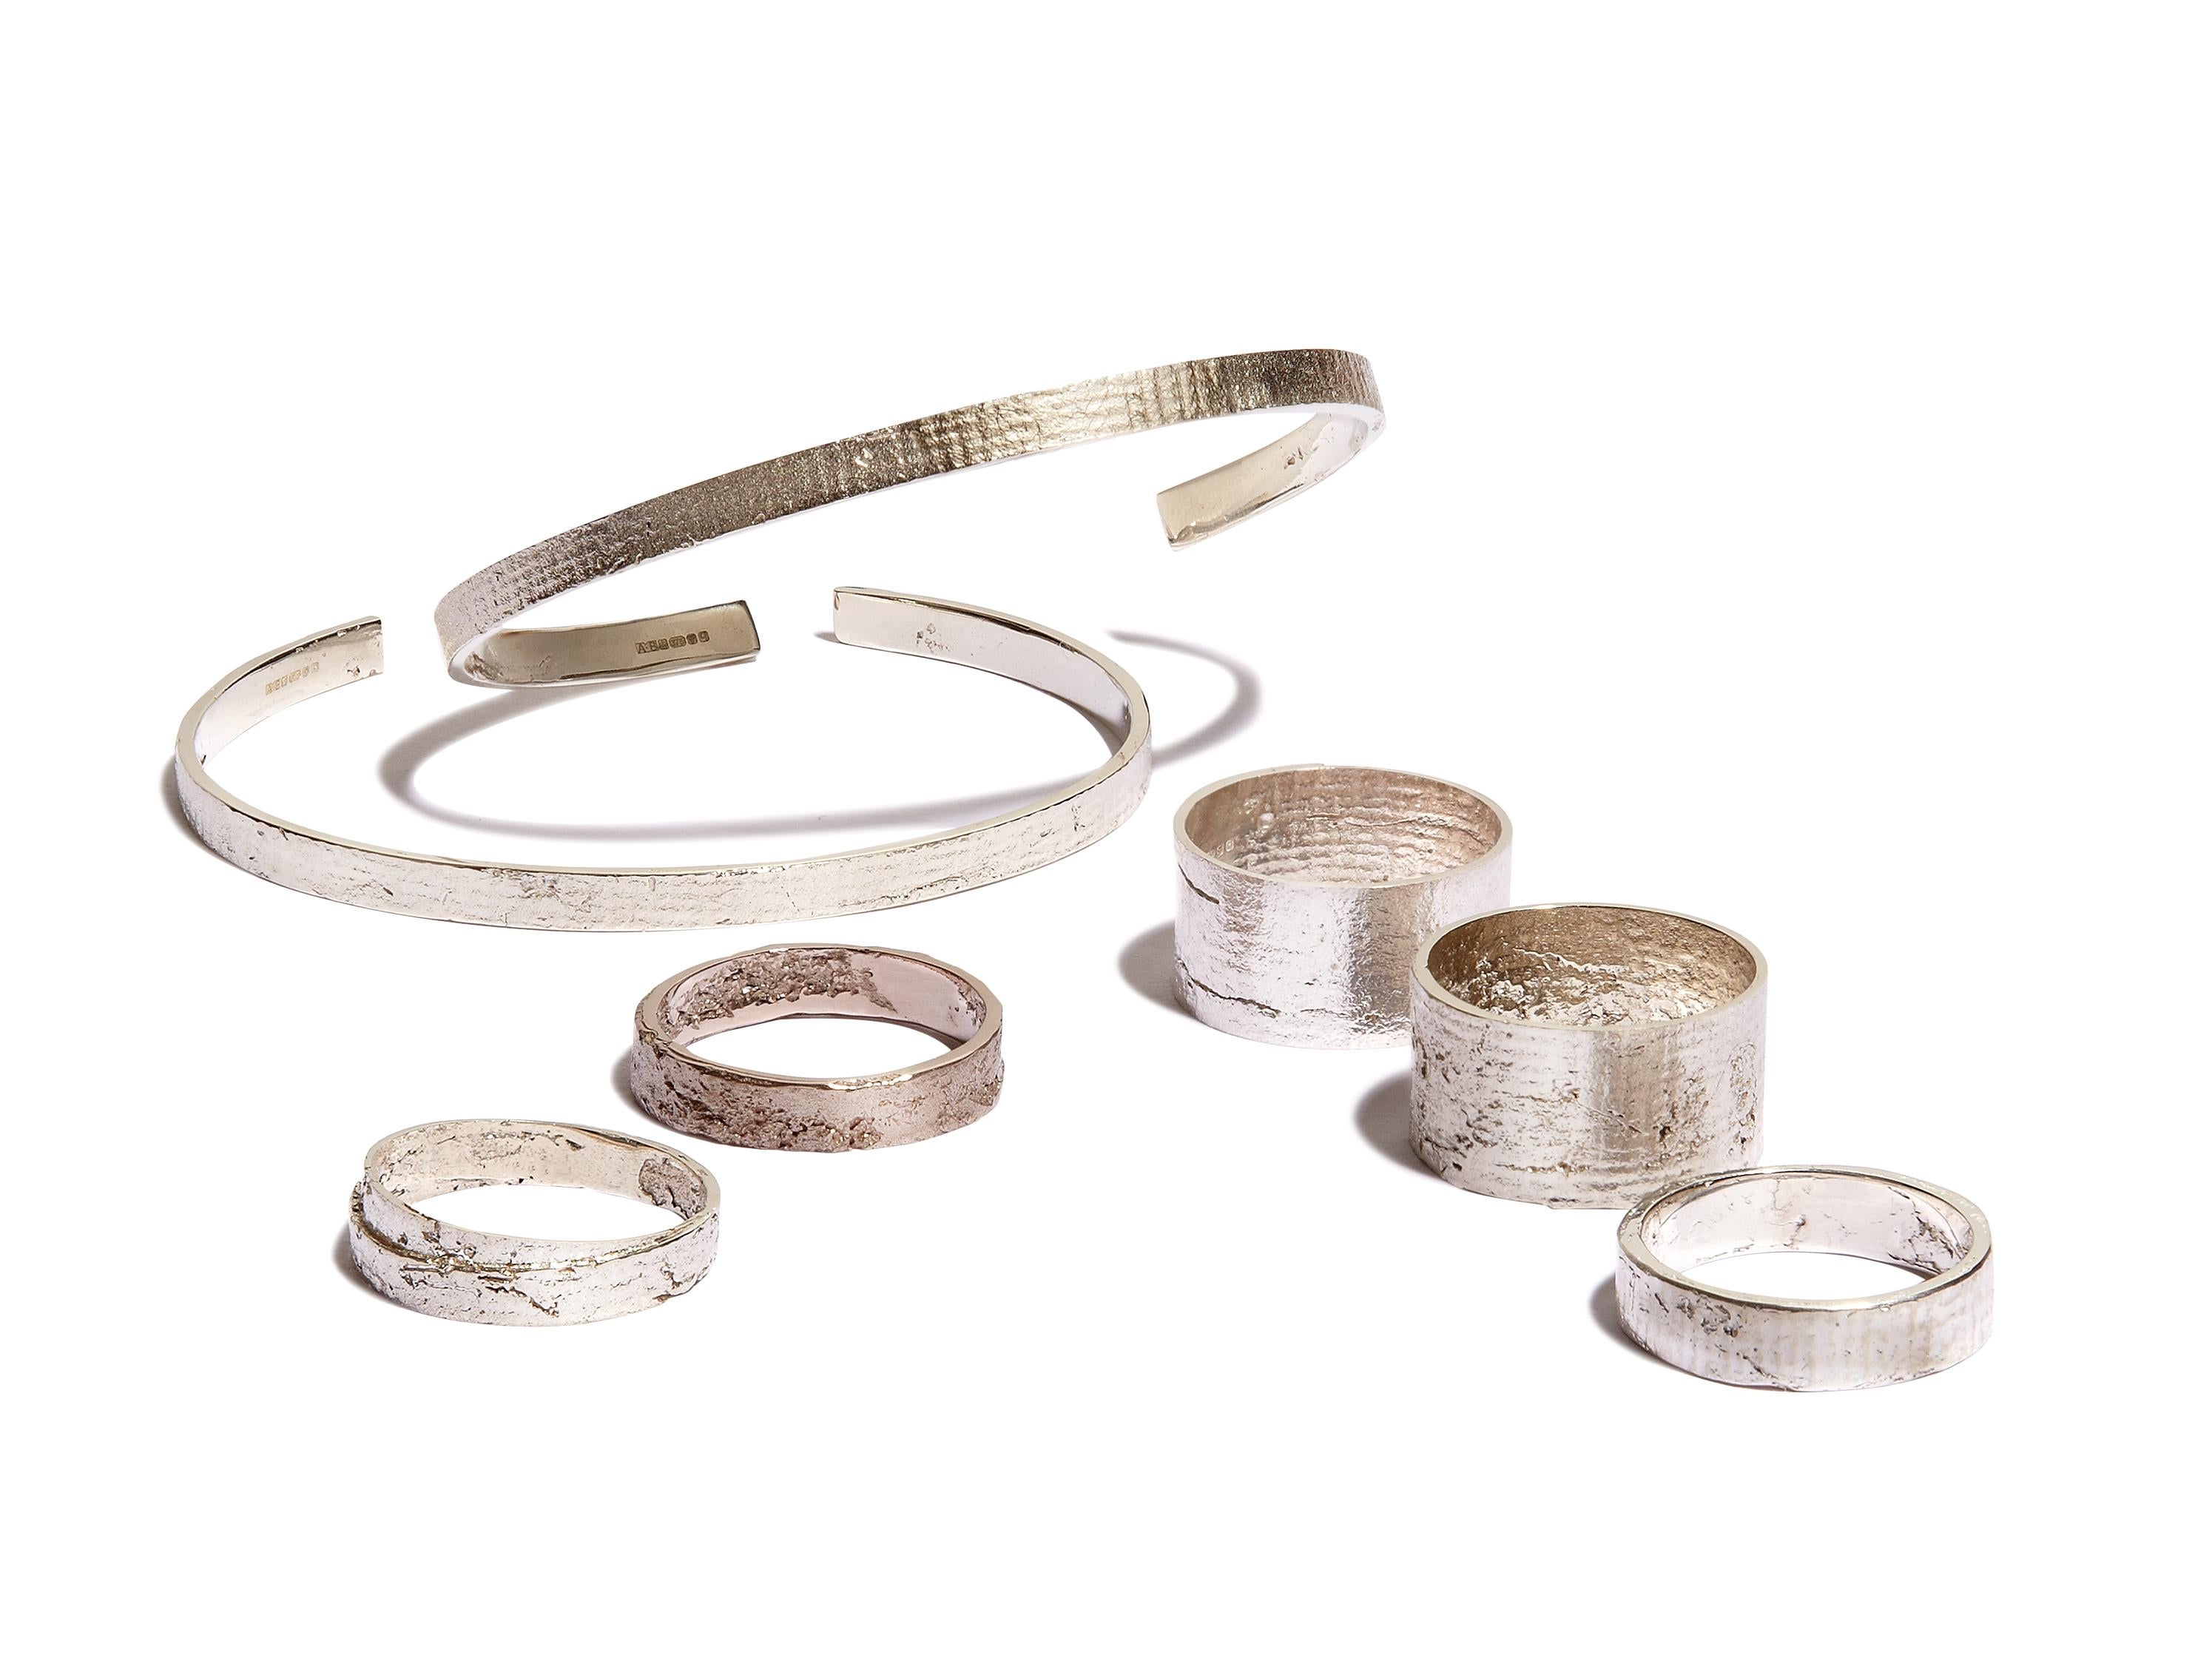 This classic cuff bracelet is handcrafted in solid sterling silver with a shimmering rustic texture.

Every piece in this collection is individually hand-crafted in paper and cast directly into precious metal in a unique and innovative process. 